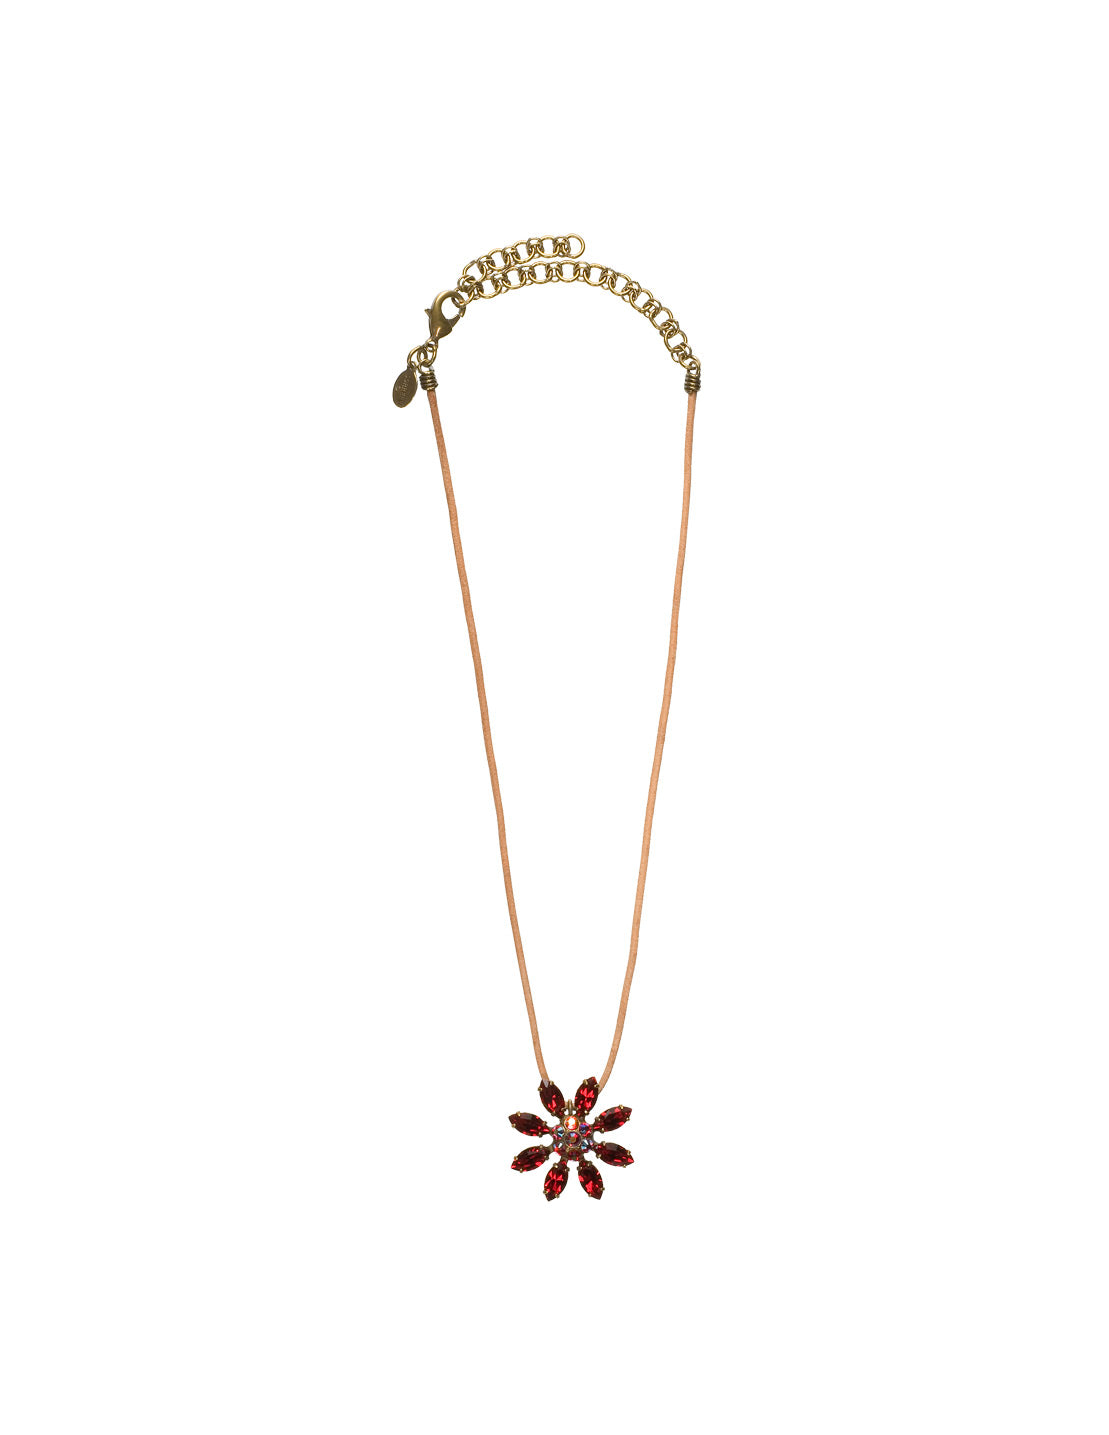 Medium Flower Pendant Necklace - NBF15AGCB - The flower shaped pendant is designed with a beautiful round crystal surronded by navette crystals. From Sorrelli's Cranberry collection in our Antique Gold-tone finish.